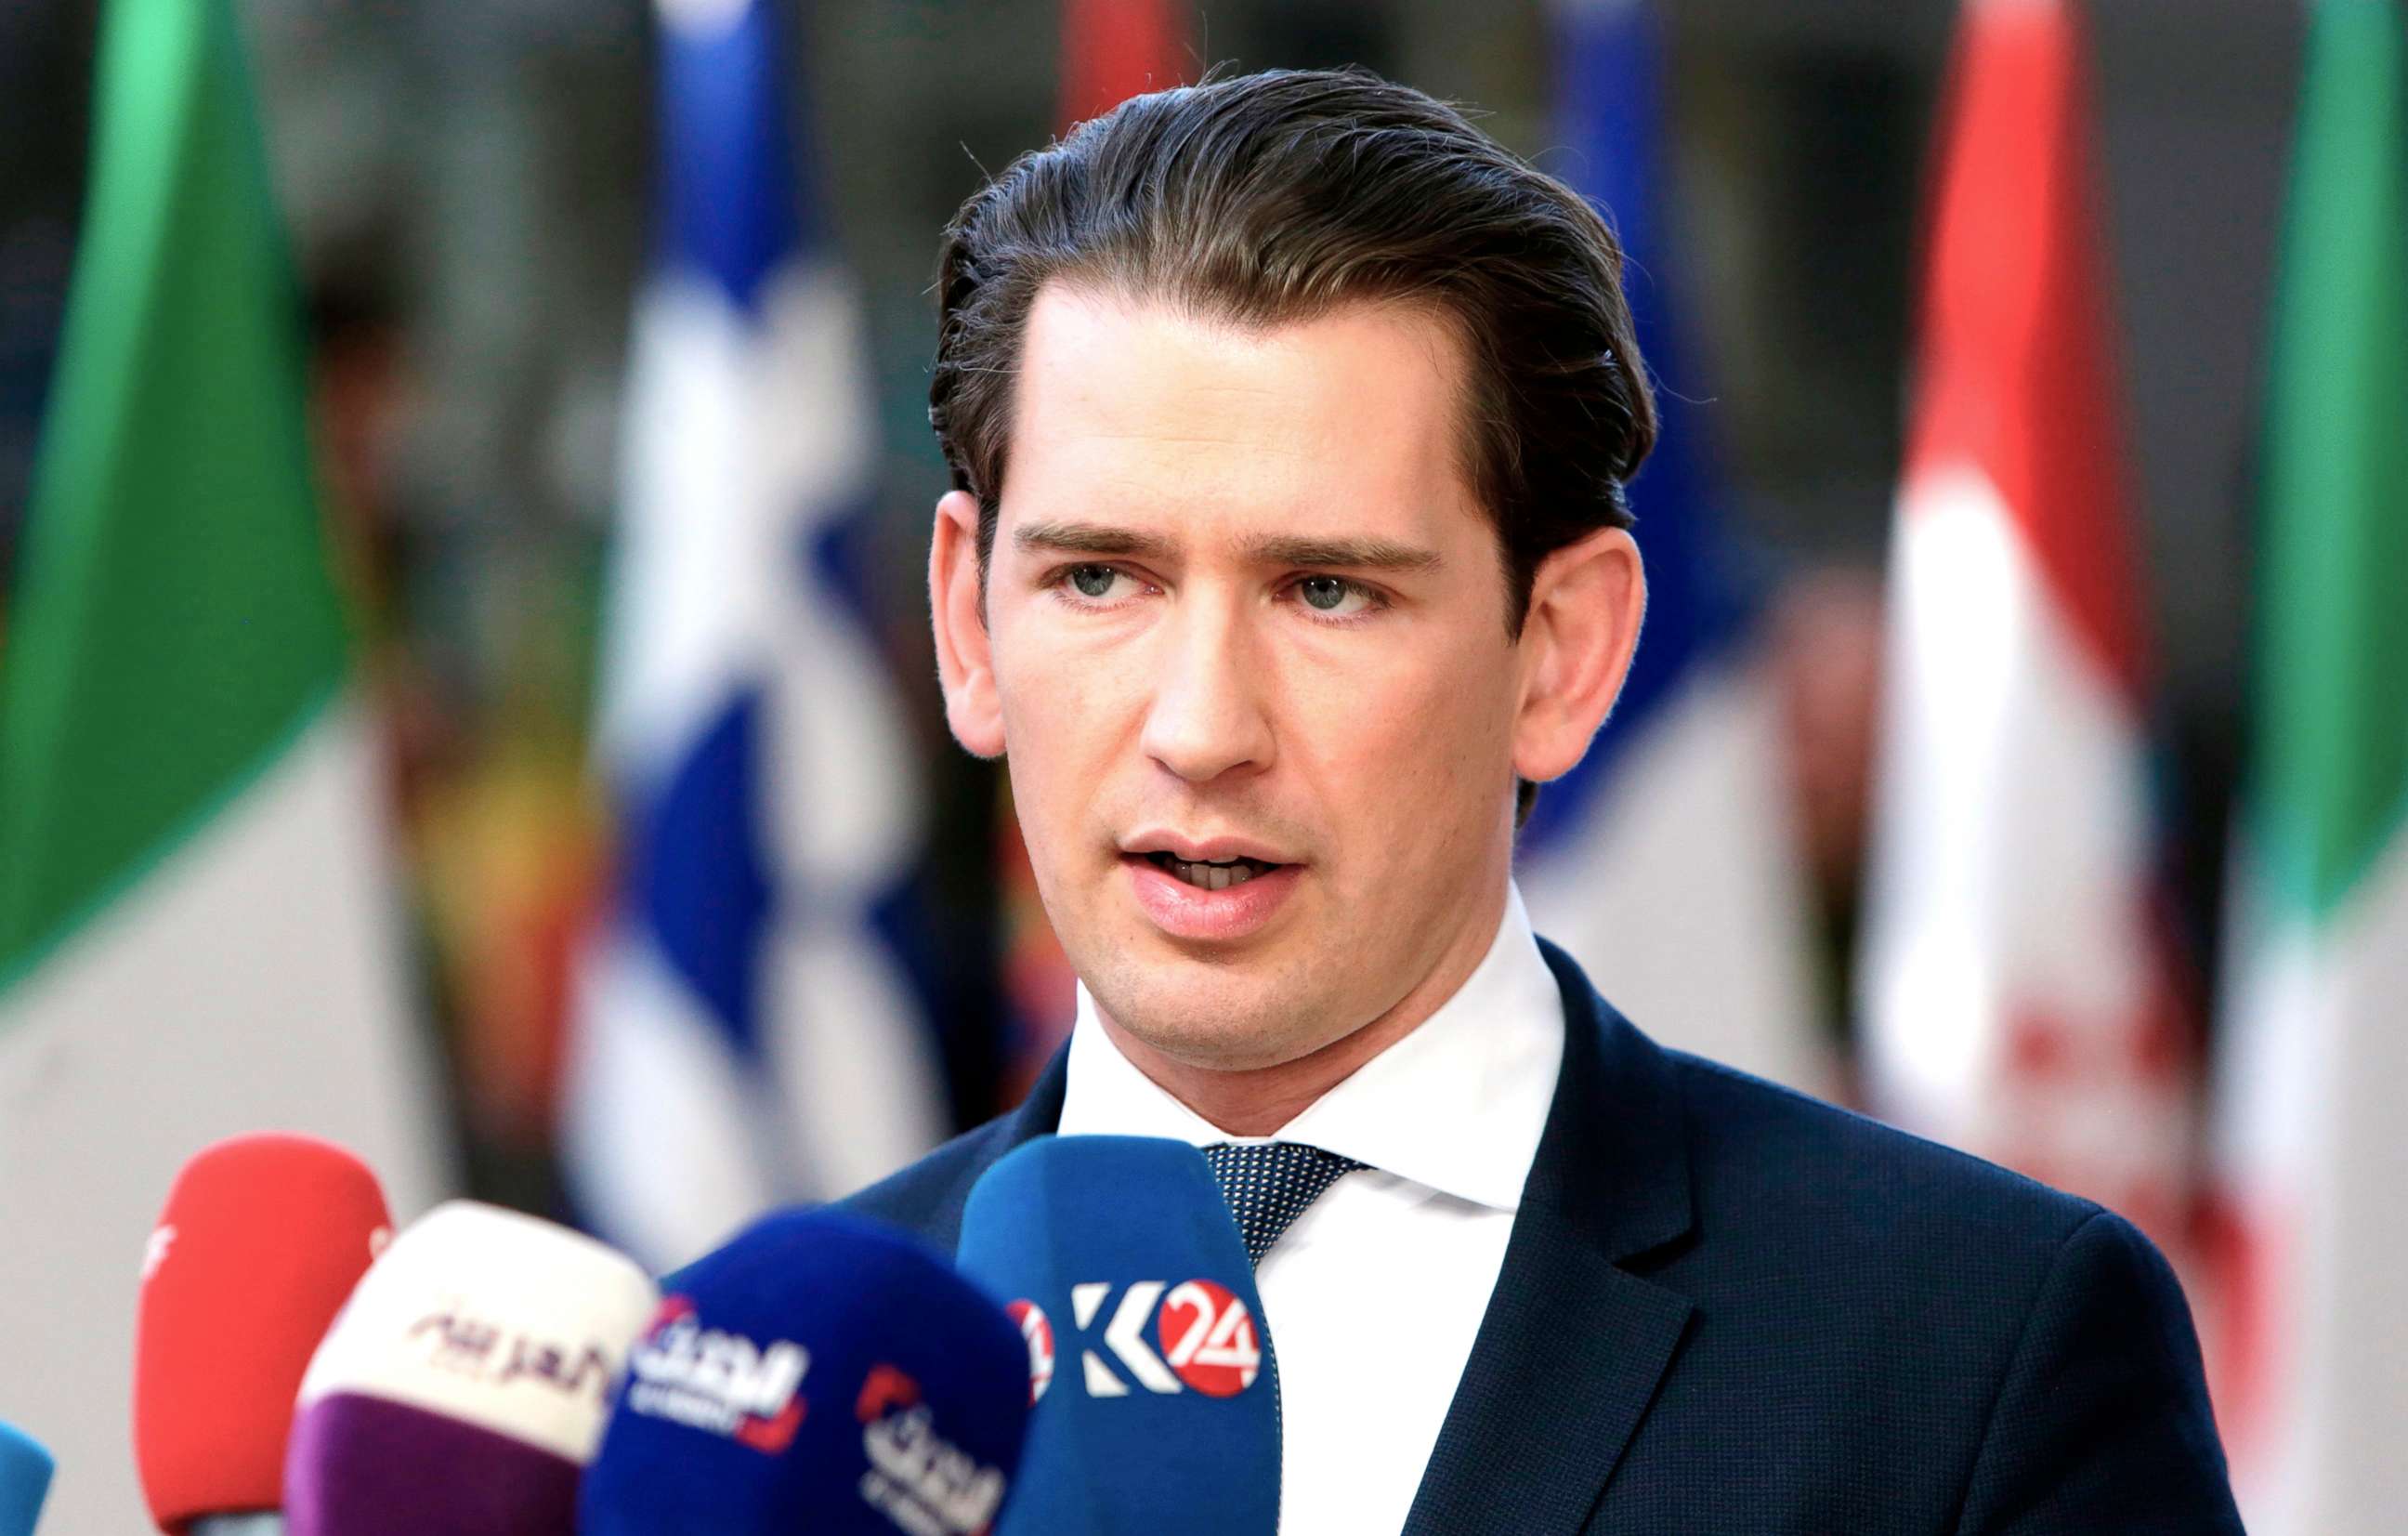 PHOTO: Austria's Chancellor Sebastian Kurz speaks to the press as he arrives ahead of a European Council meeting on Brexit at The European Parliament in Brussels, April 10, 2019. 